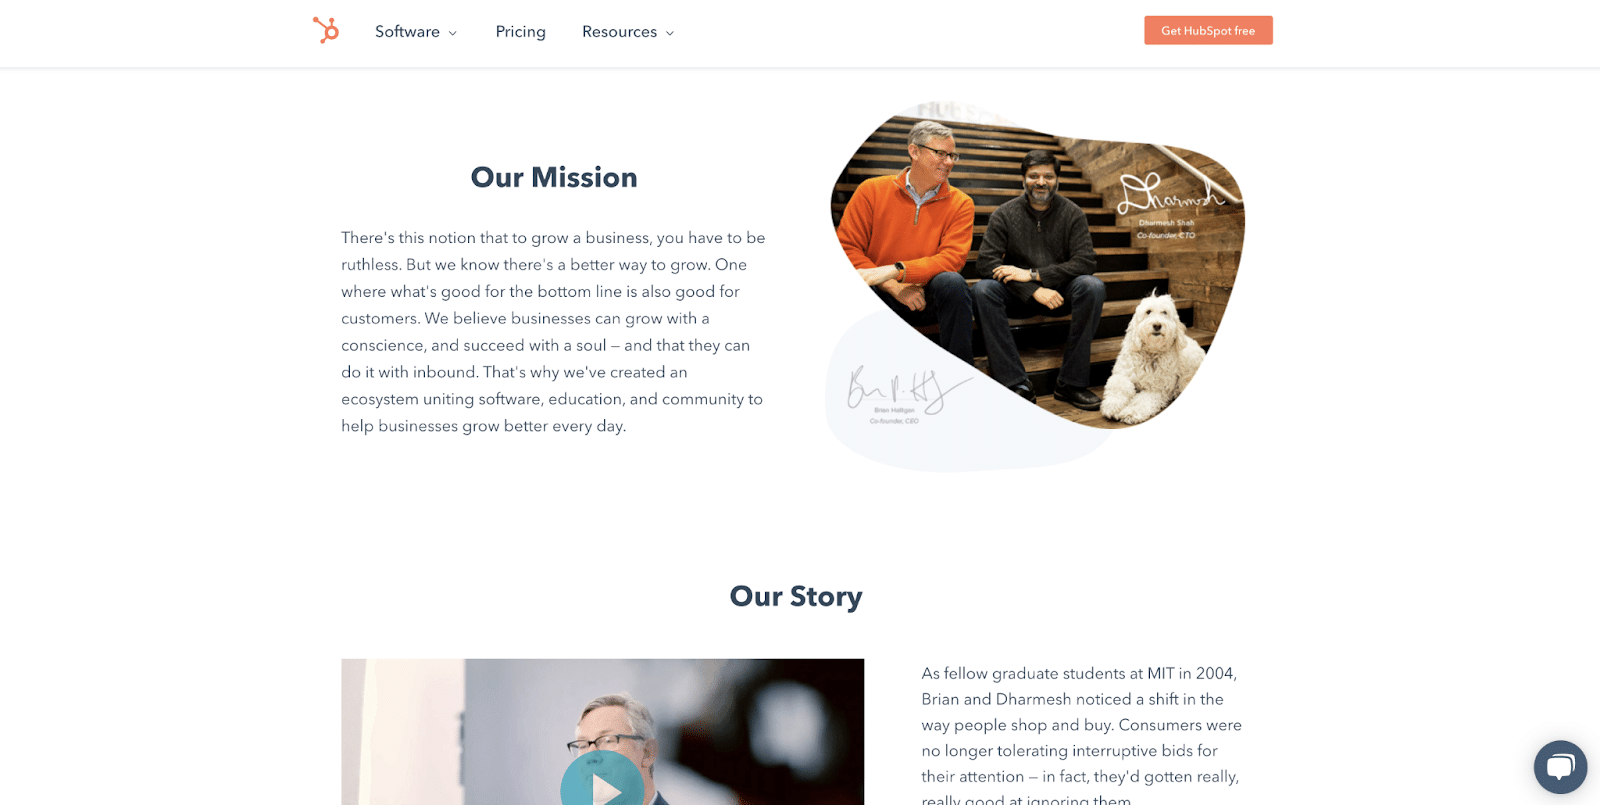 Hubspot’s About Us page